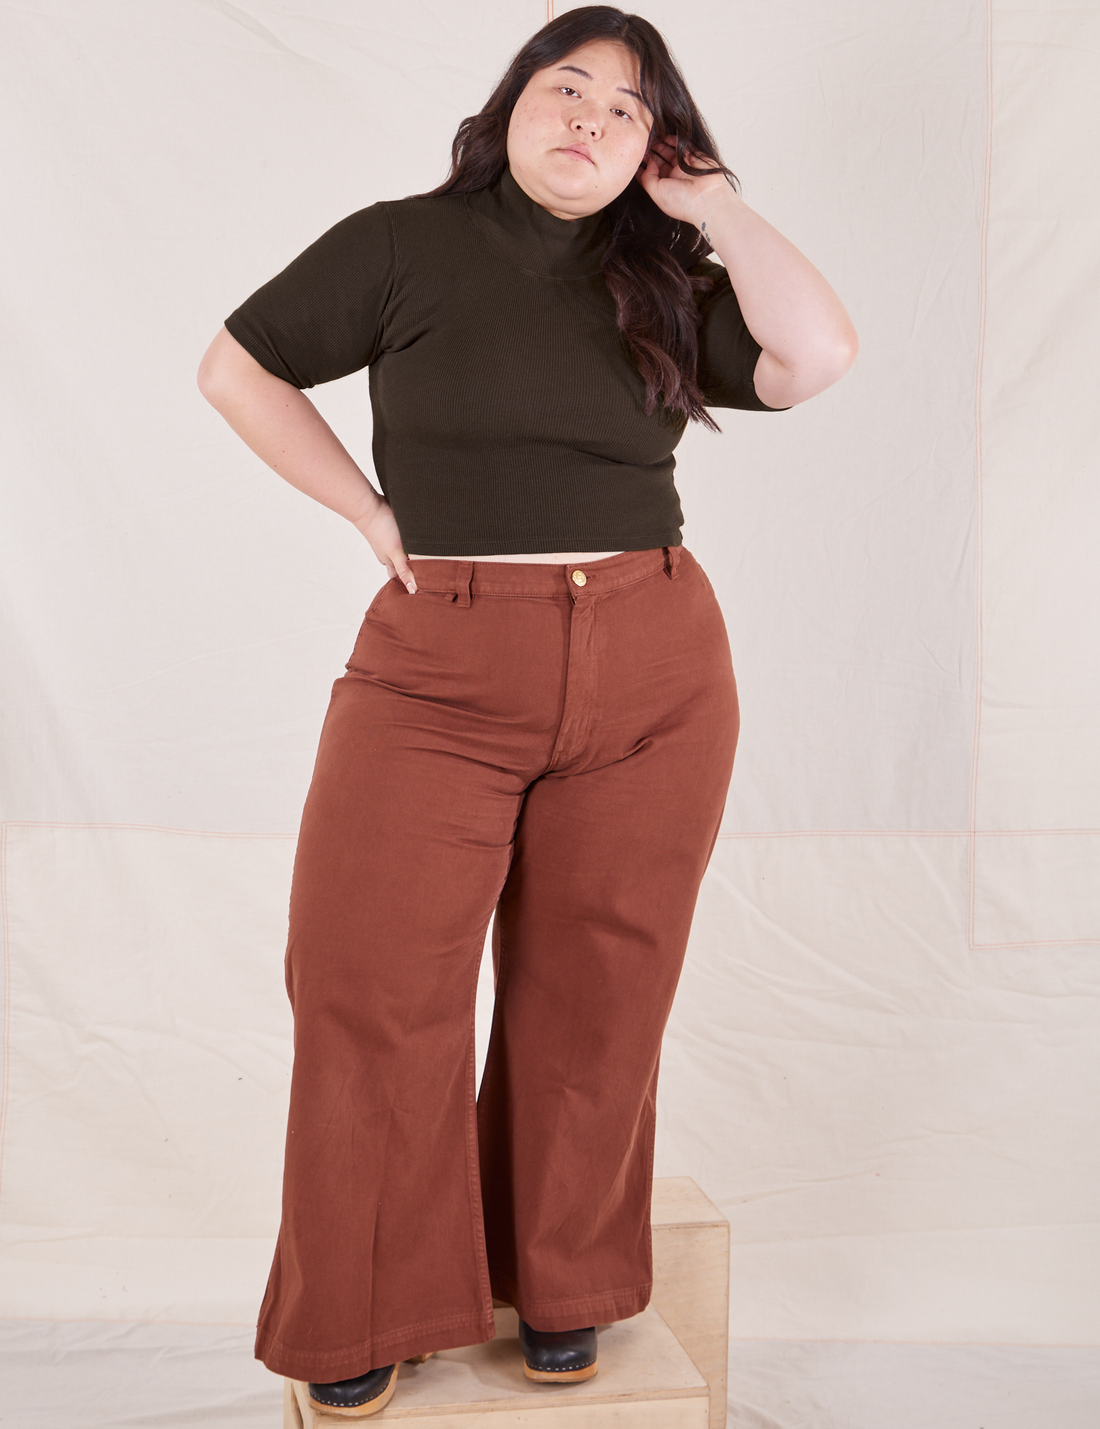 Ashley is wearing size M 1/2 Sleeve Essential Turtleneck in Espresso Brown paired with fudgesicle brown Bell Bottoms